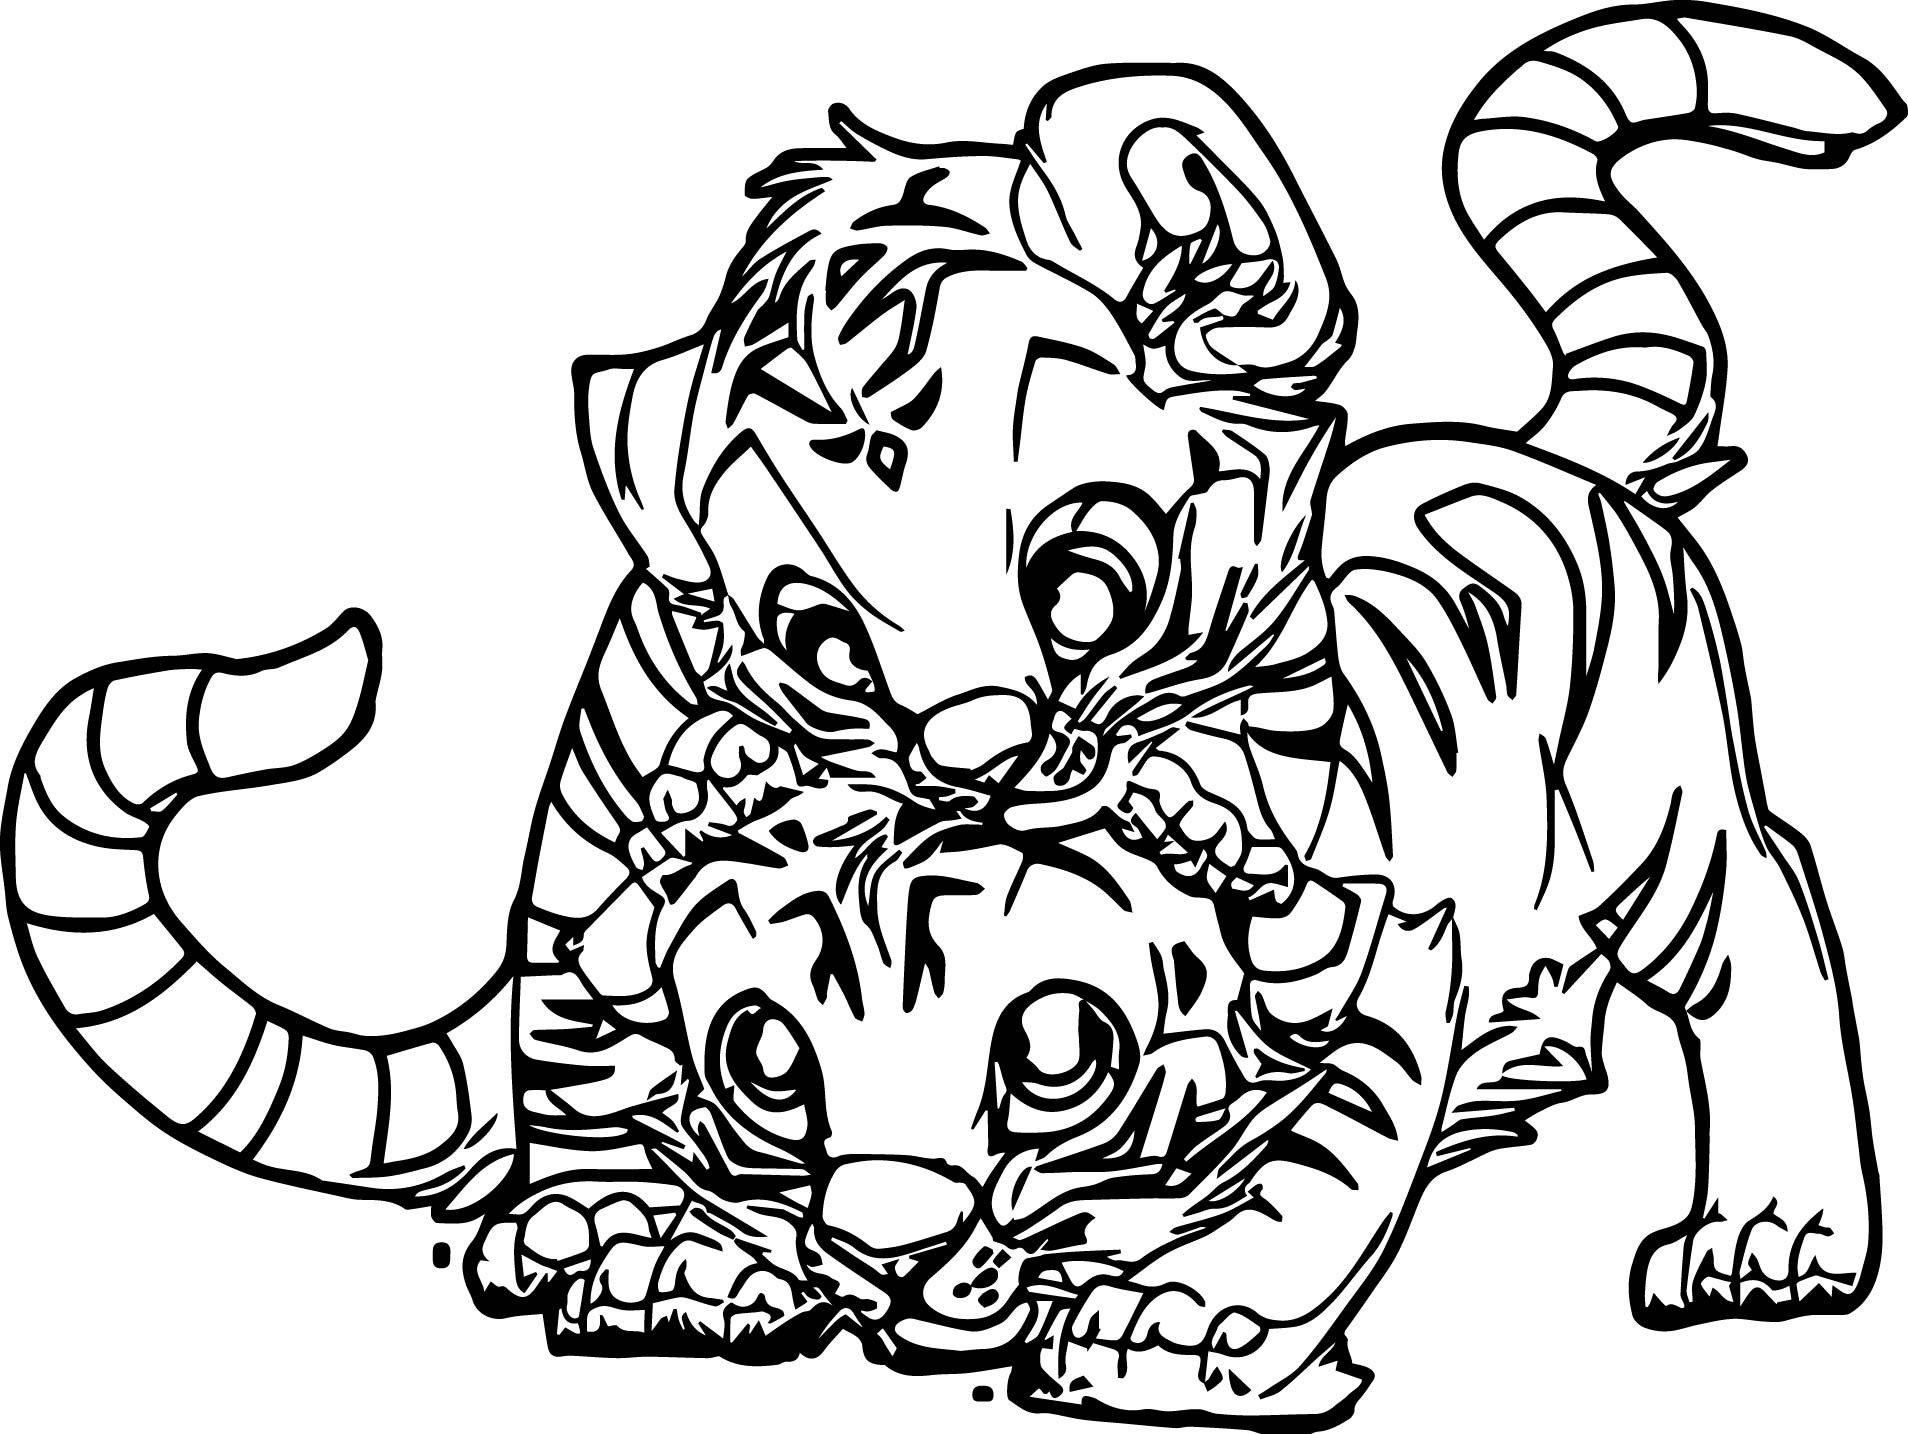 Baby Tiger Coloring Pages
 Two Baby Tiger Coloring Page